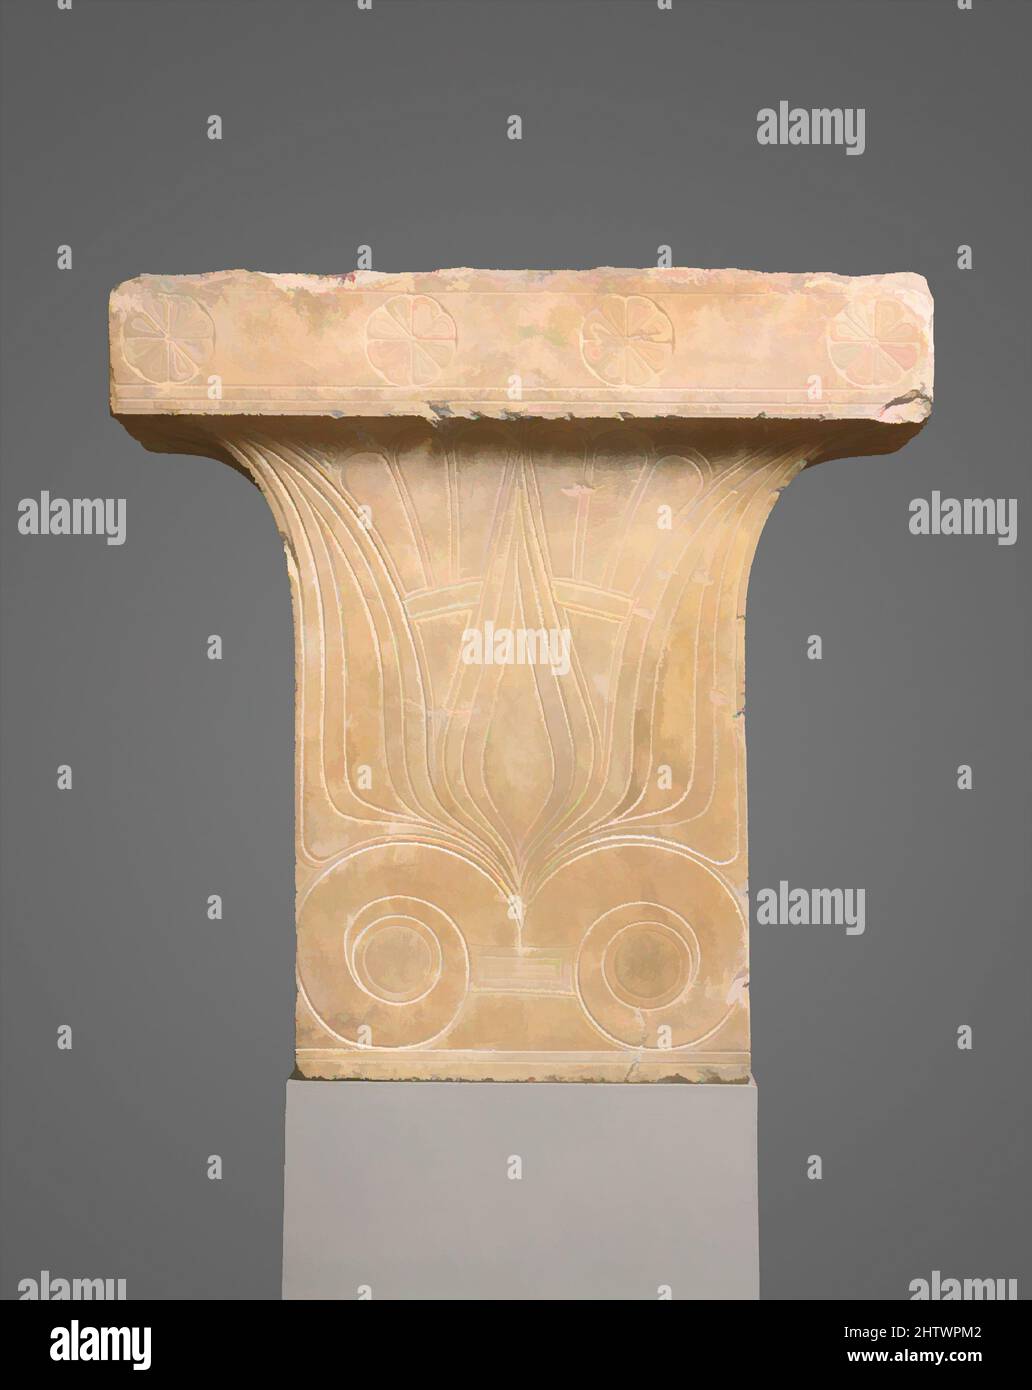 Art inspired by Marble cavetto capital, Archaic, mid-6th century B.C., Greek, Attic, Marble, Hymettian, H. 24 15/16 in. (63.3 cm), Stone Sculpture, This capital was part of a funerary or votive stele; it surmounted a tall shaft and supported a separately carved finial—presumably a, Classic works modernized by Artotop with a splash of modernity. Shapes, color and value, eye-catching visual impact on art. Emotions through freedom of artworks in a contemporary way. A timeless message pursuing a wildly creative new direction. Artists turning to the digital medium and creating the Artotop NFT Stock Photo